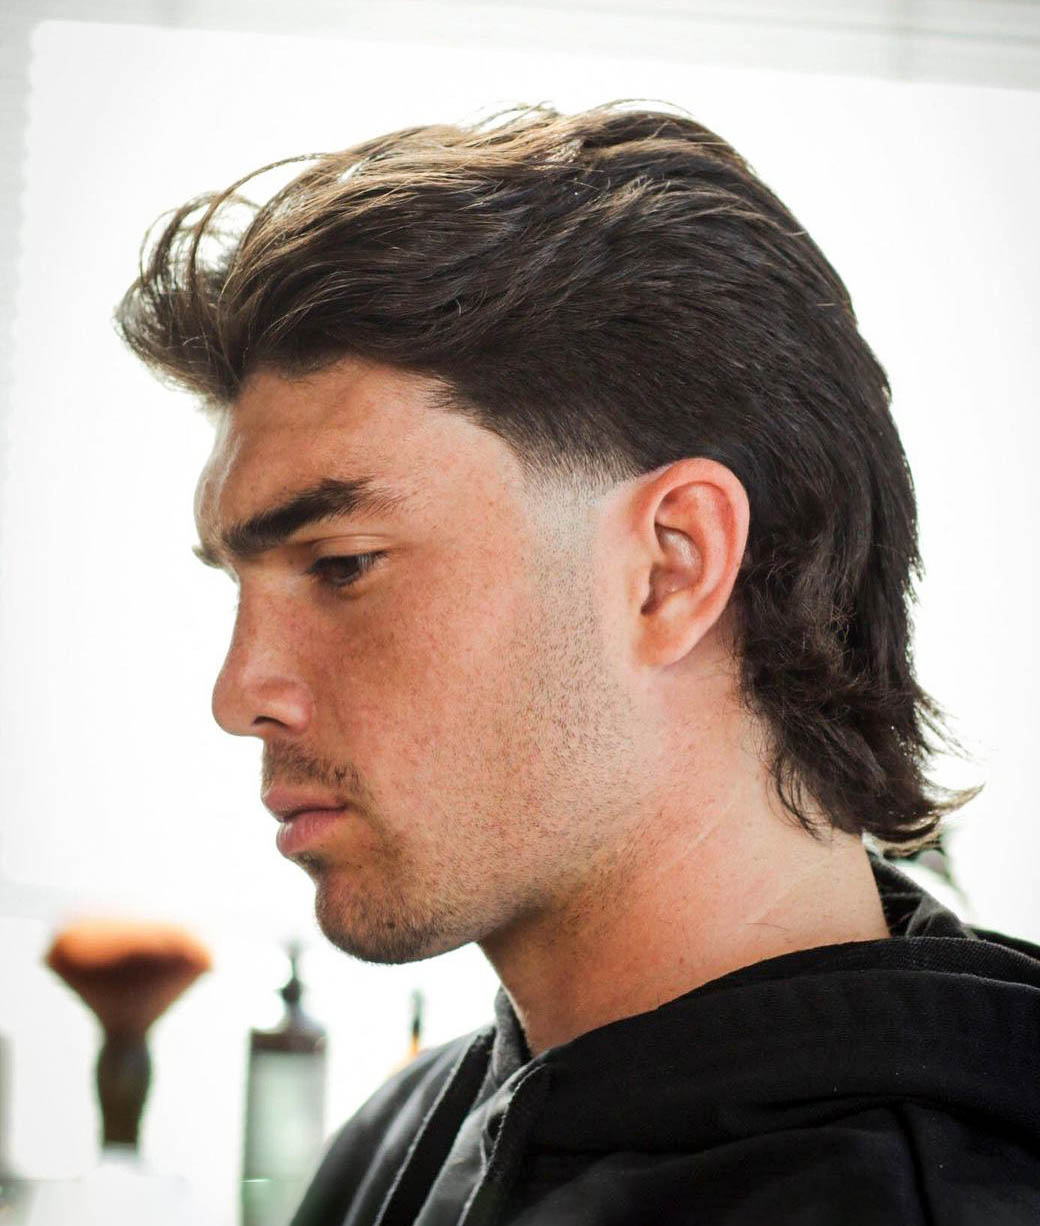 The Best Mullet Haircut Looks For Men – Top Hairstyles In 2023 |  FashionBeans